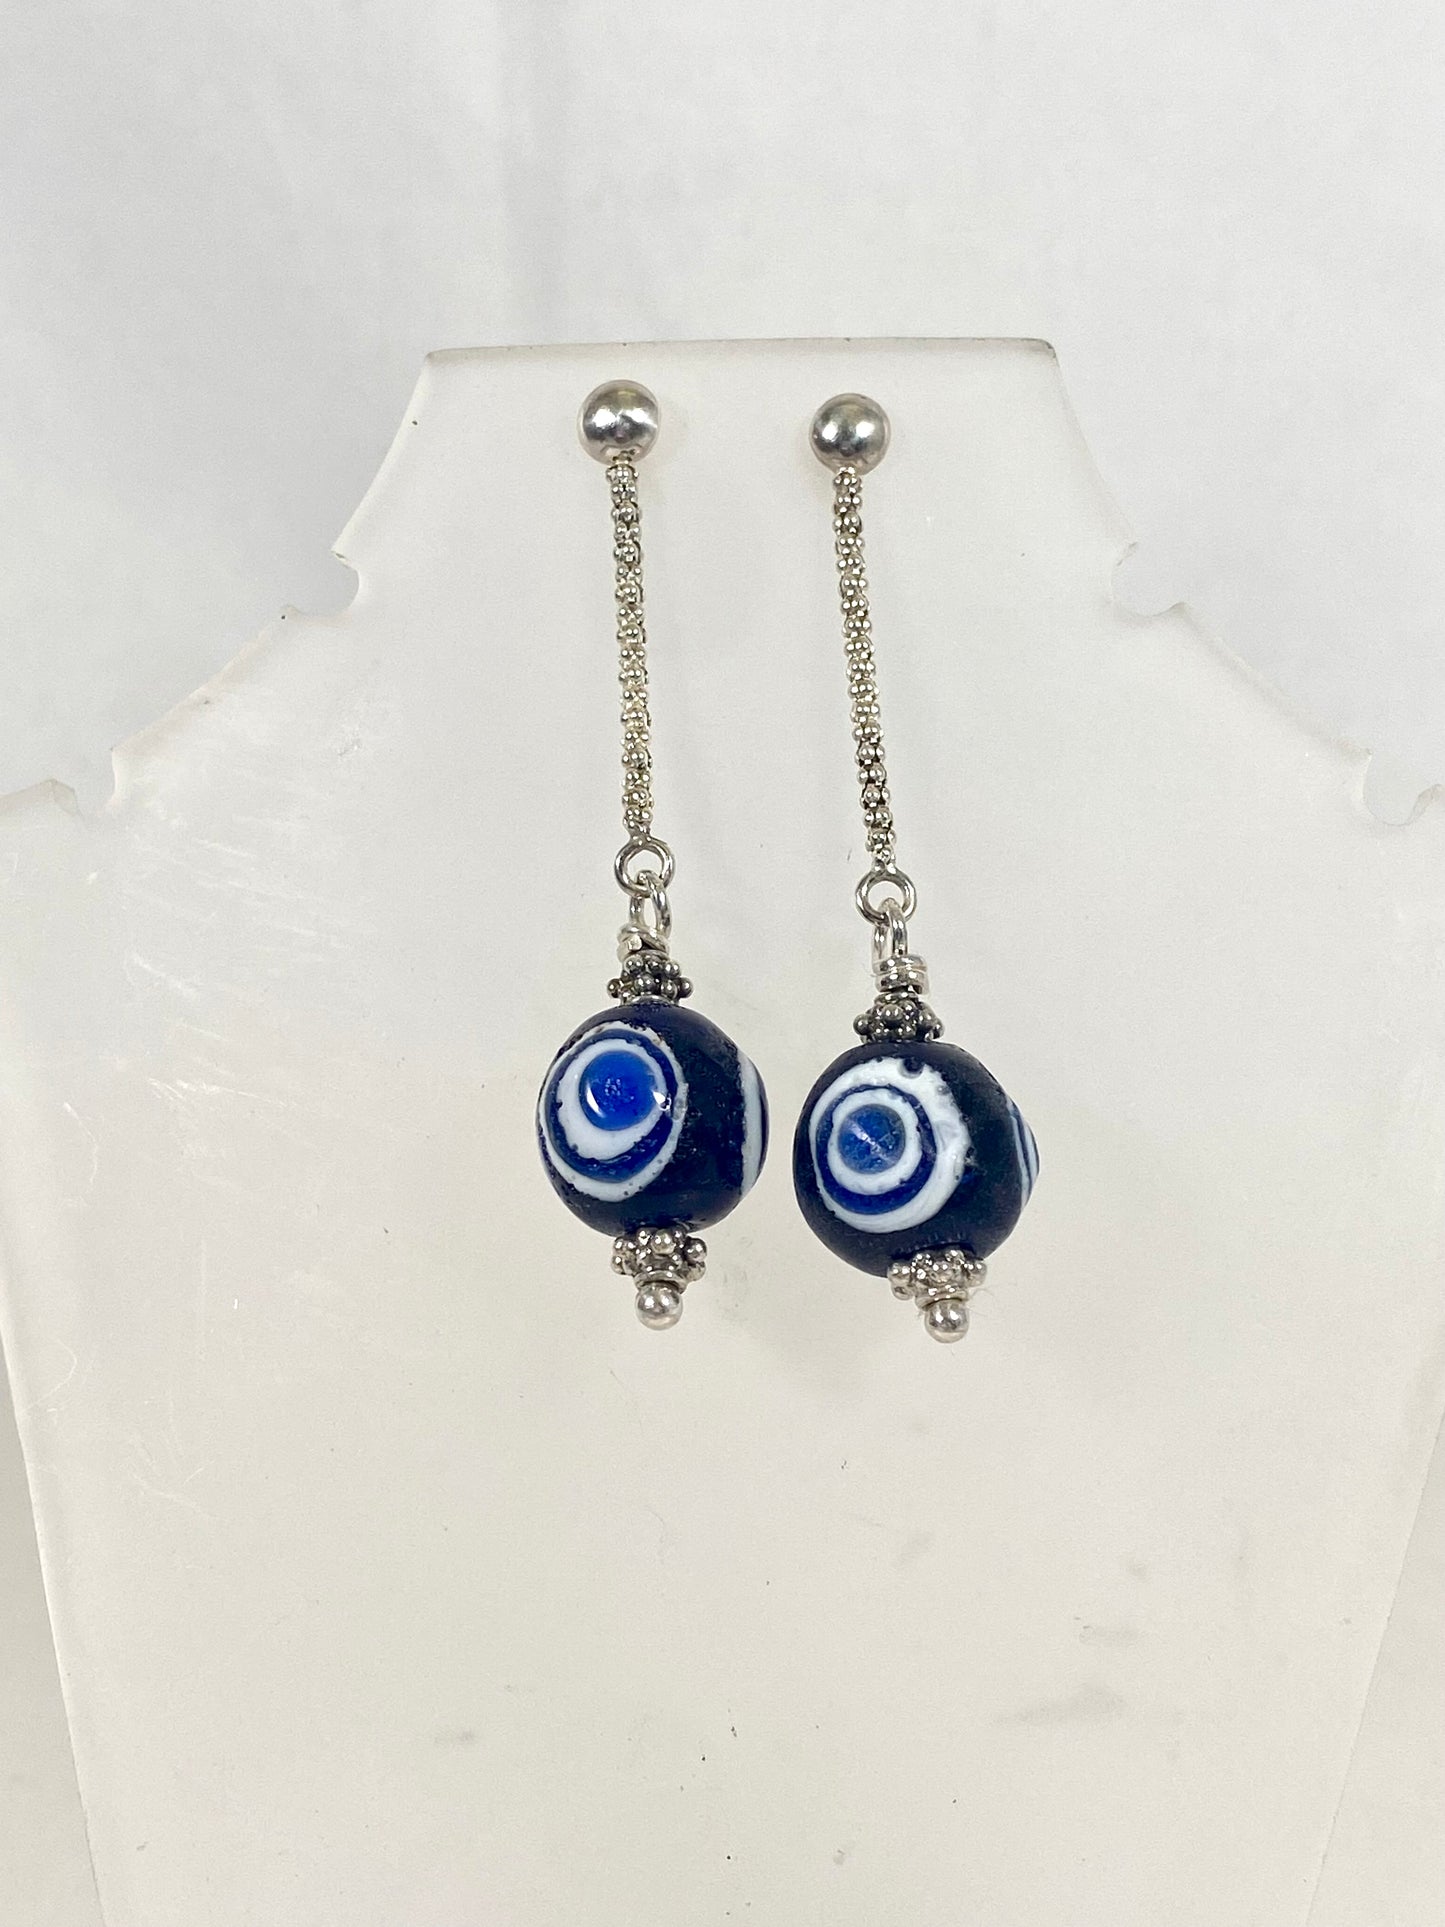 Ancient / Antique Javanese Trade Beads- Millefiori Eye Bead Earrings circa 10th to 14th century set in Sterling Silver